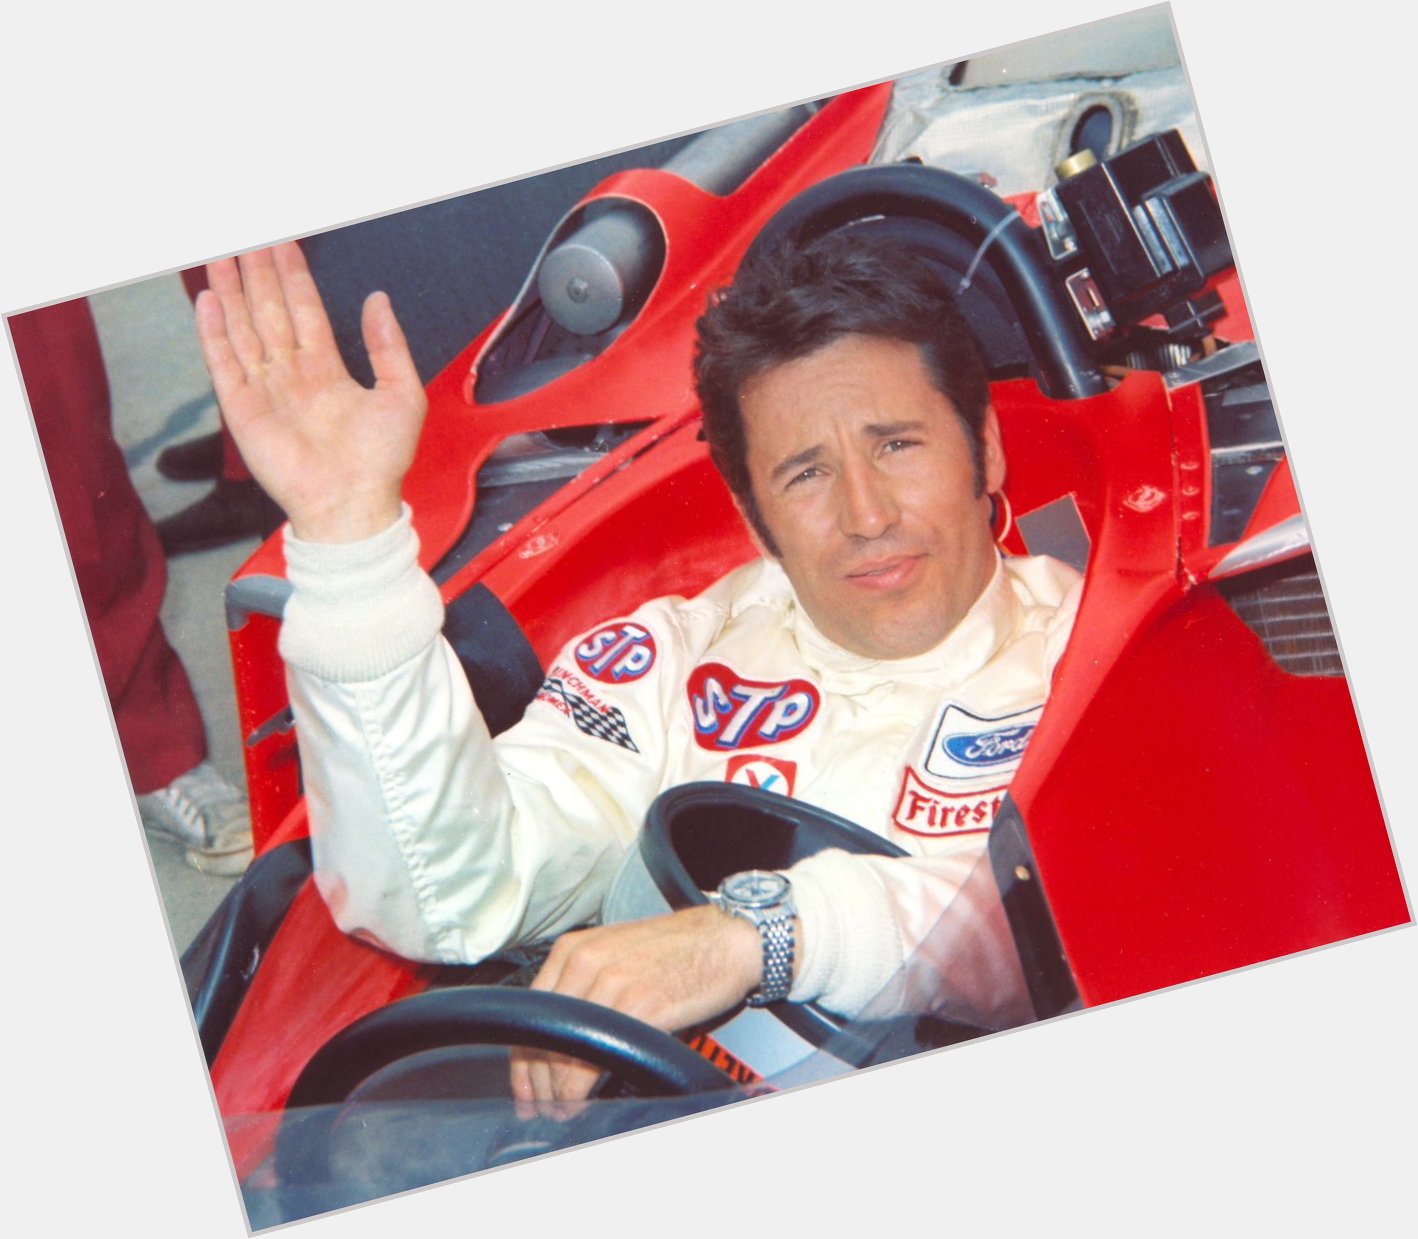 Happy 80th birthday to the great Mario Andretti, the coolest of the cool. 